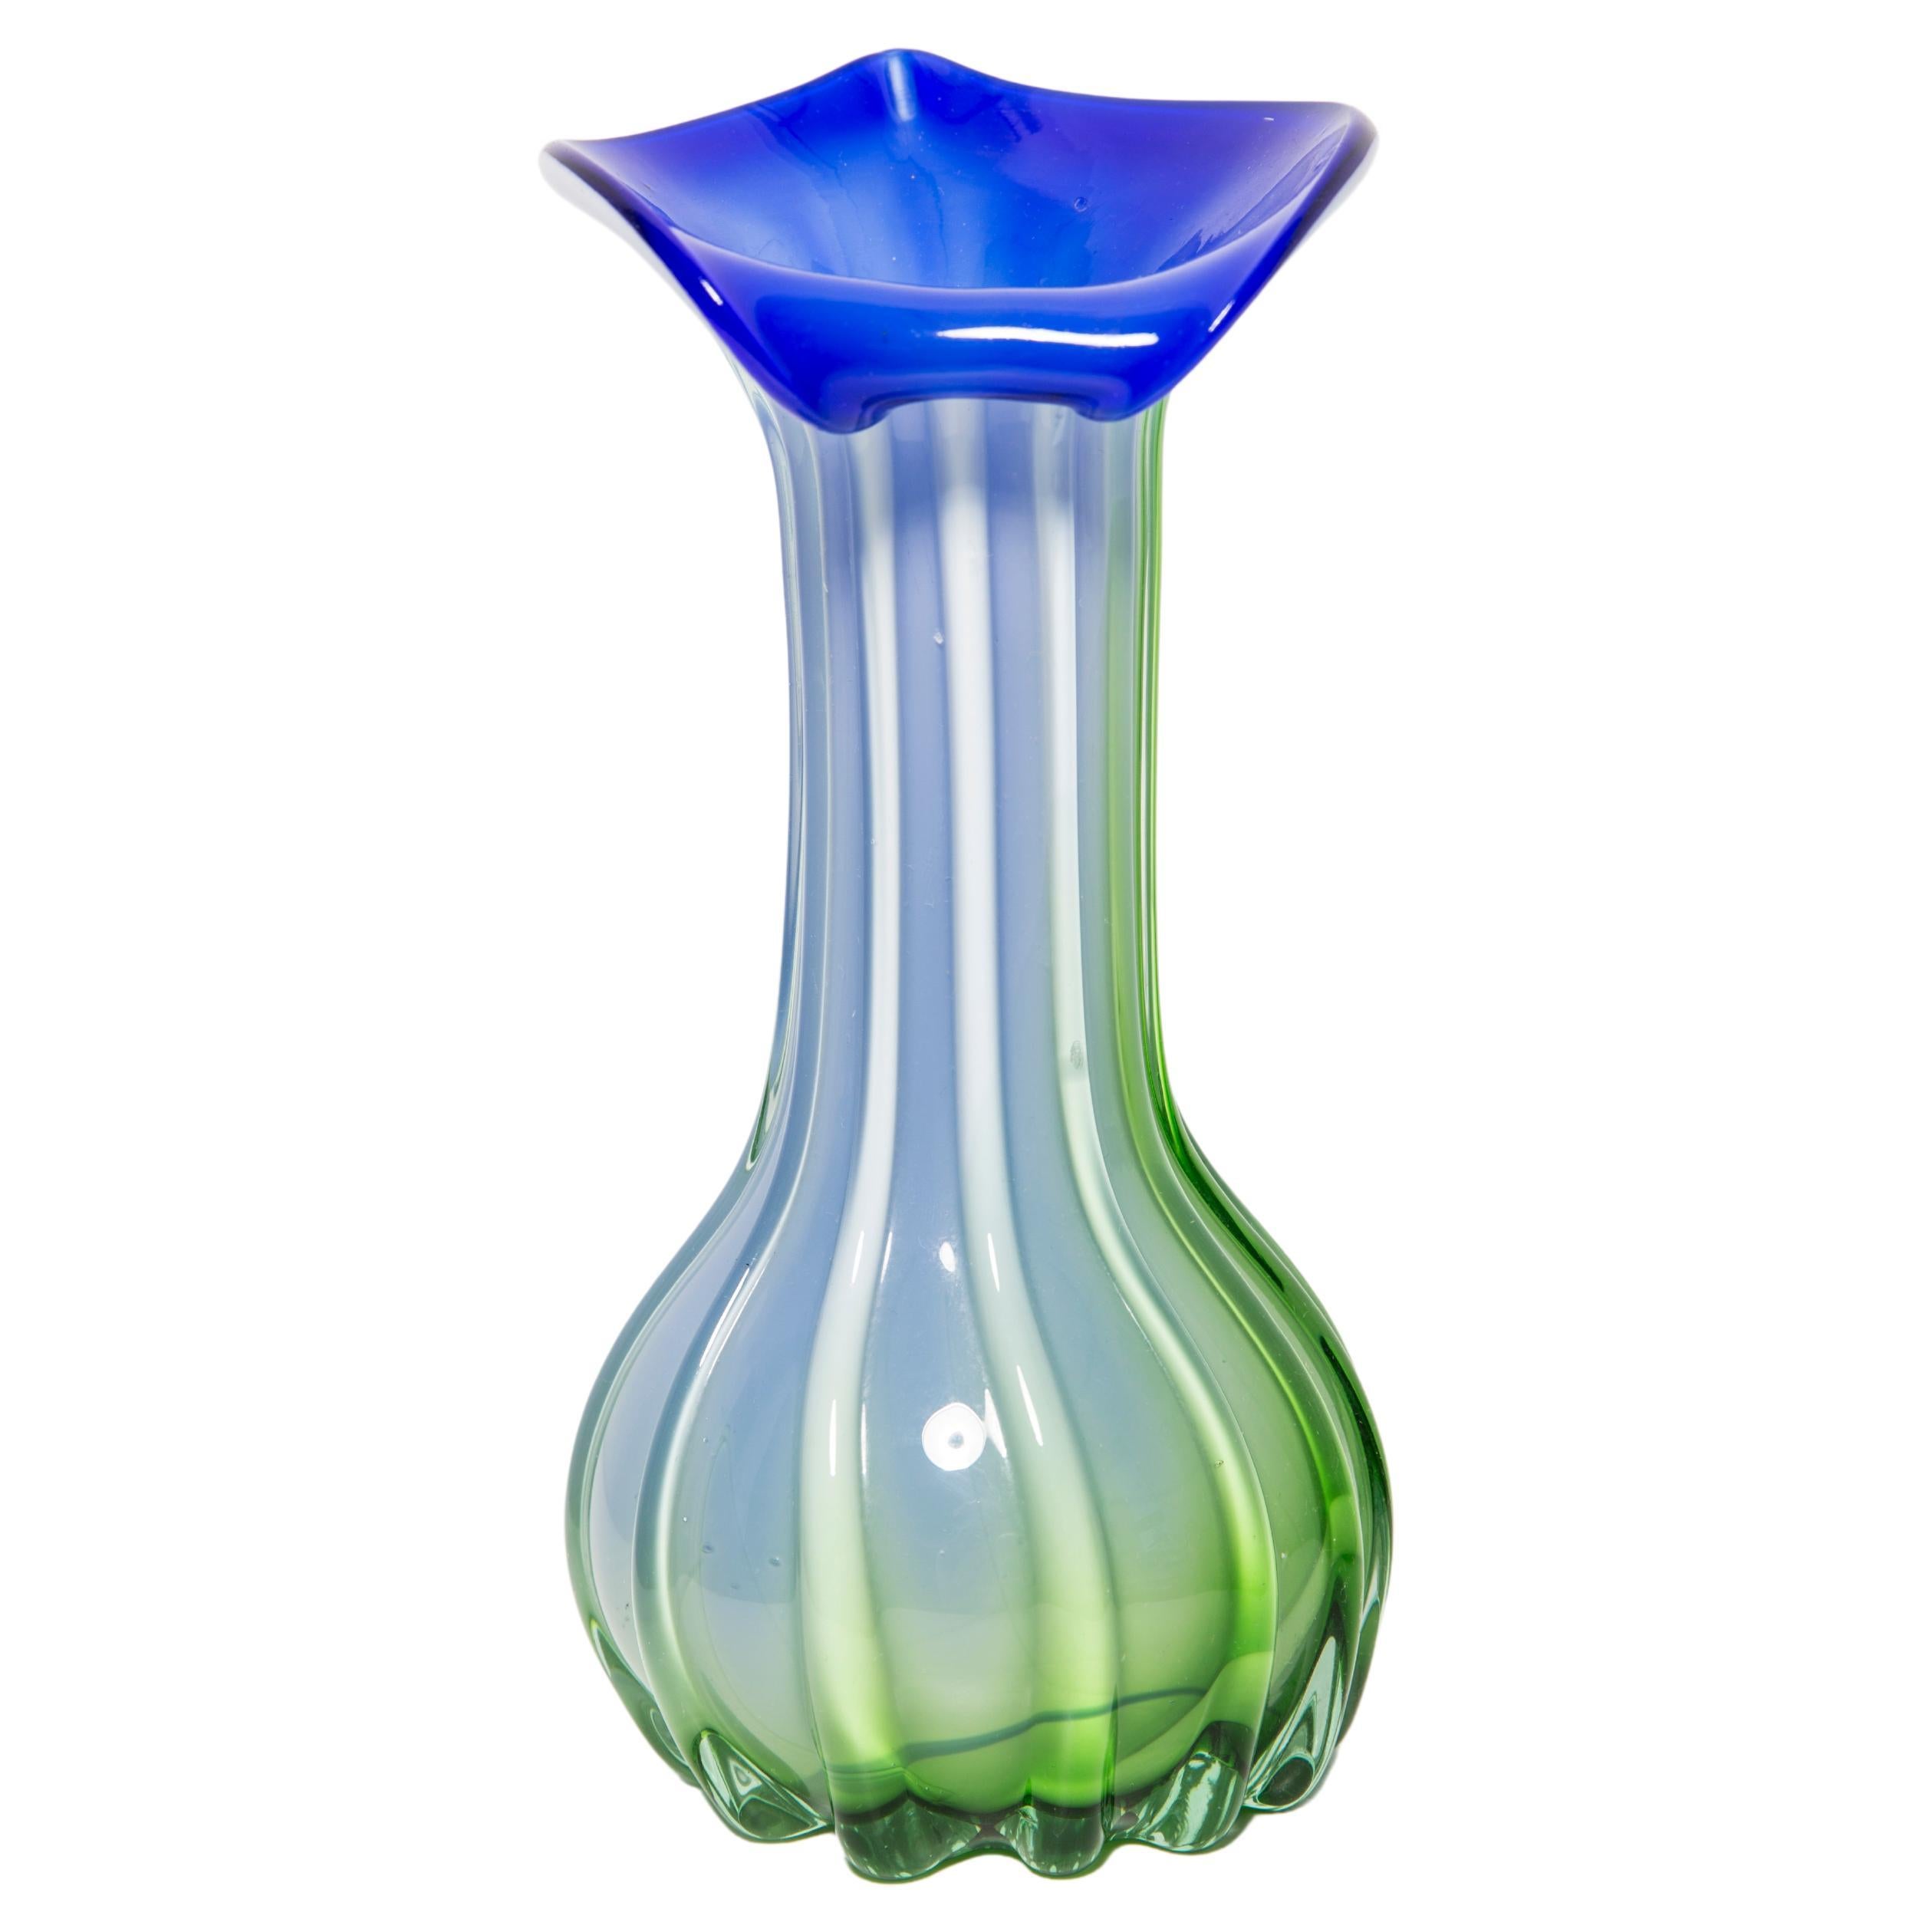 Midcentury Vintage Green and Blue Murano Vase, Italy, 1960s For Sale